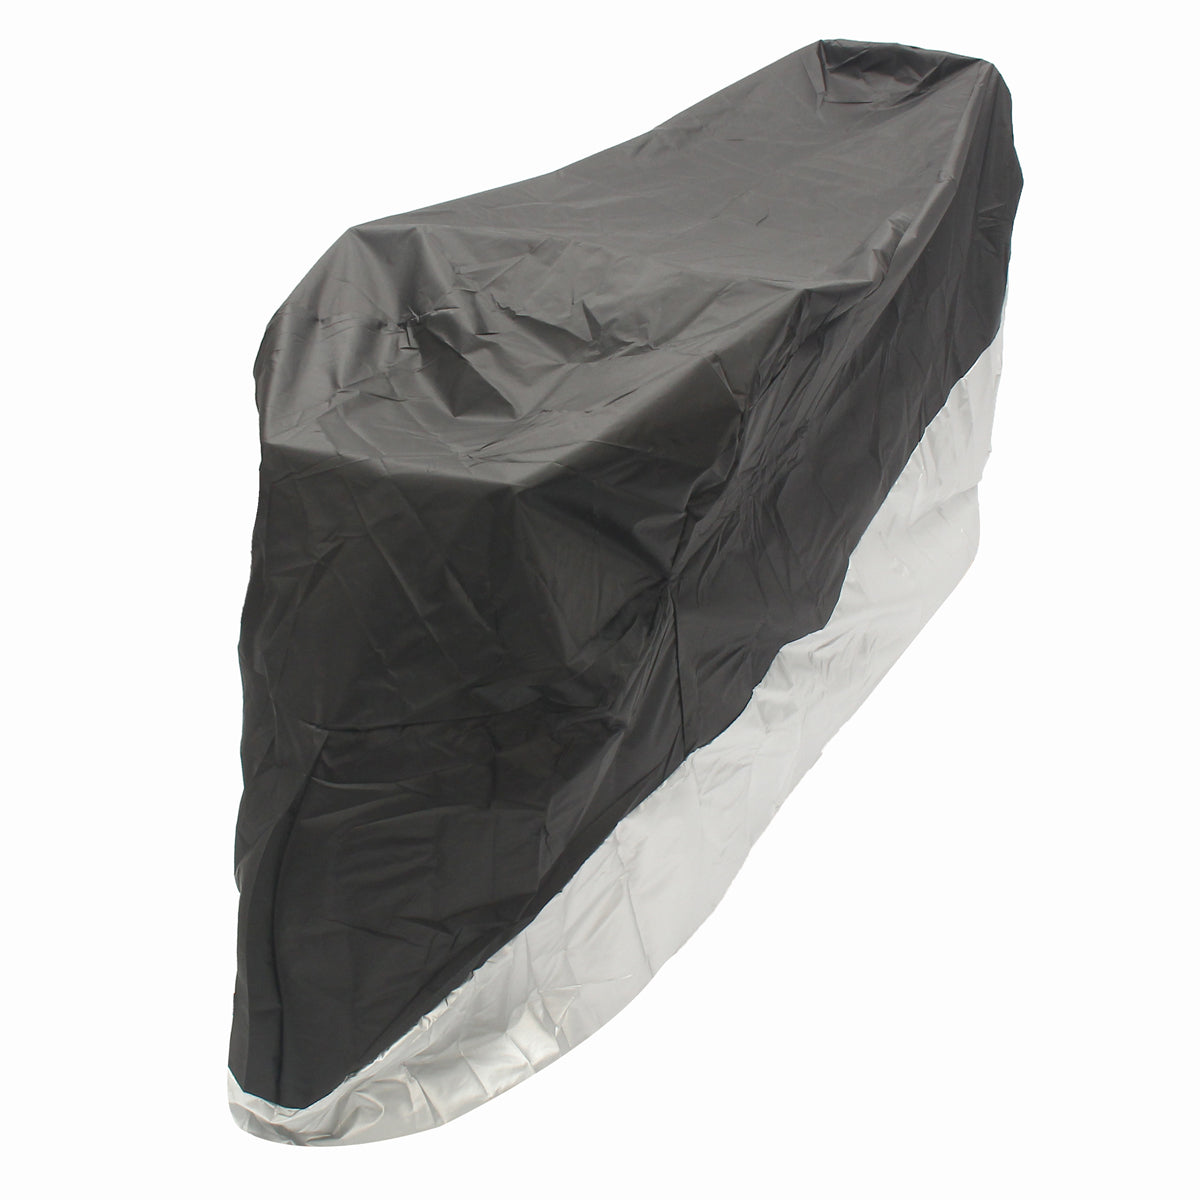 Dark Slate Gray Waterproof Motorcycle Cover M L XL XXL 3XL 4XL Scooter Moped Rain UV Dust Cover